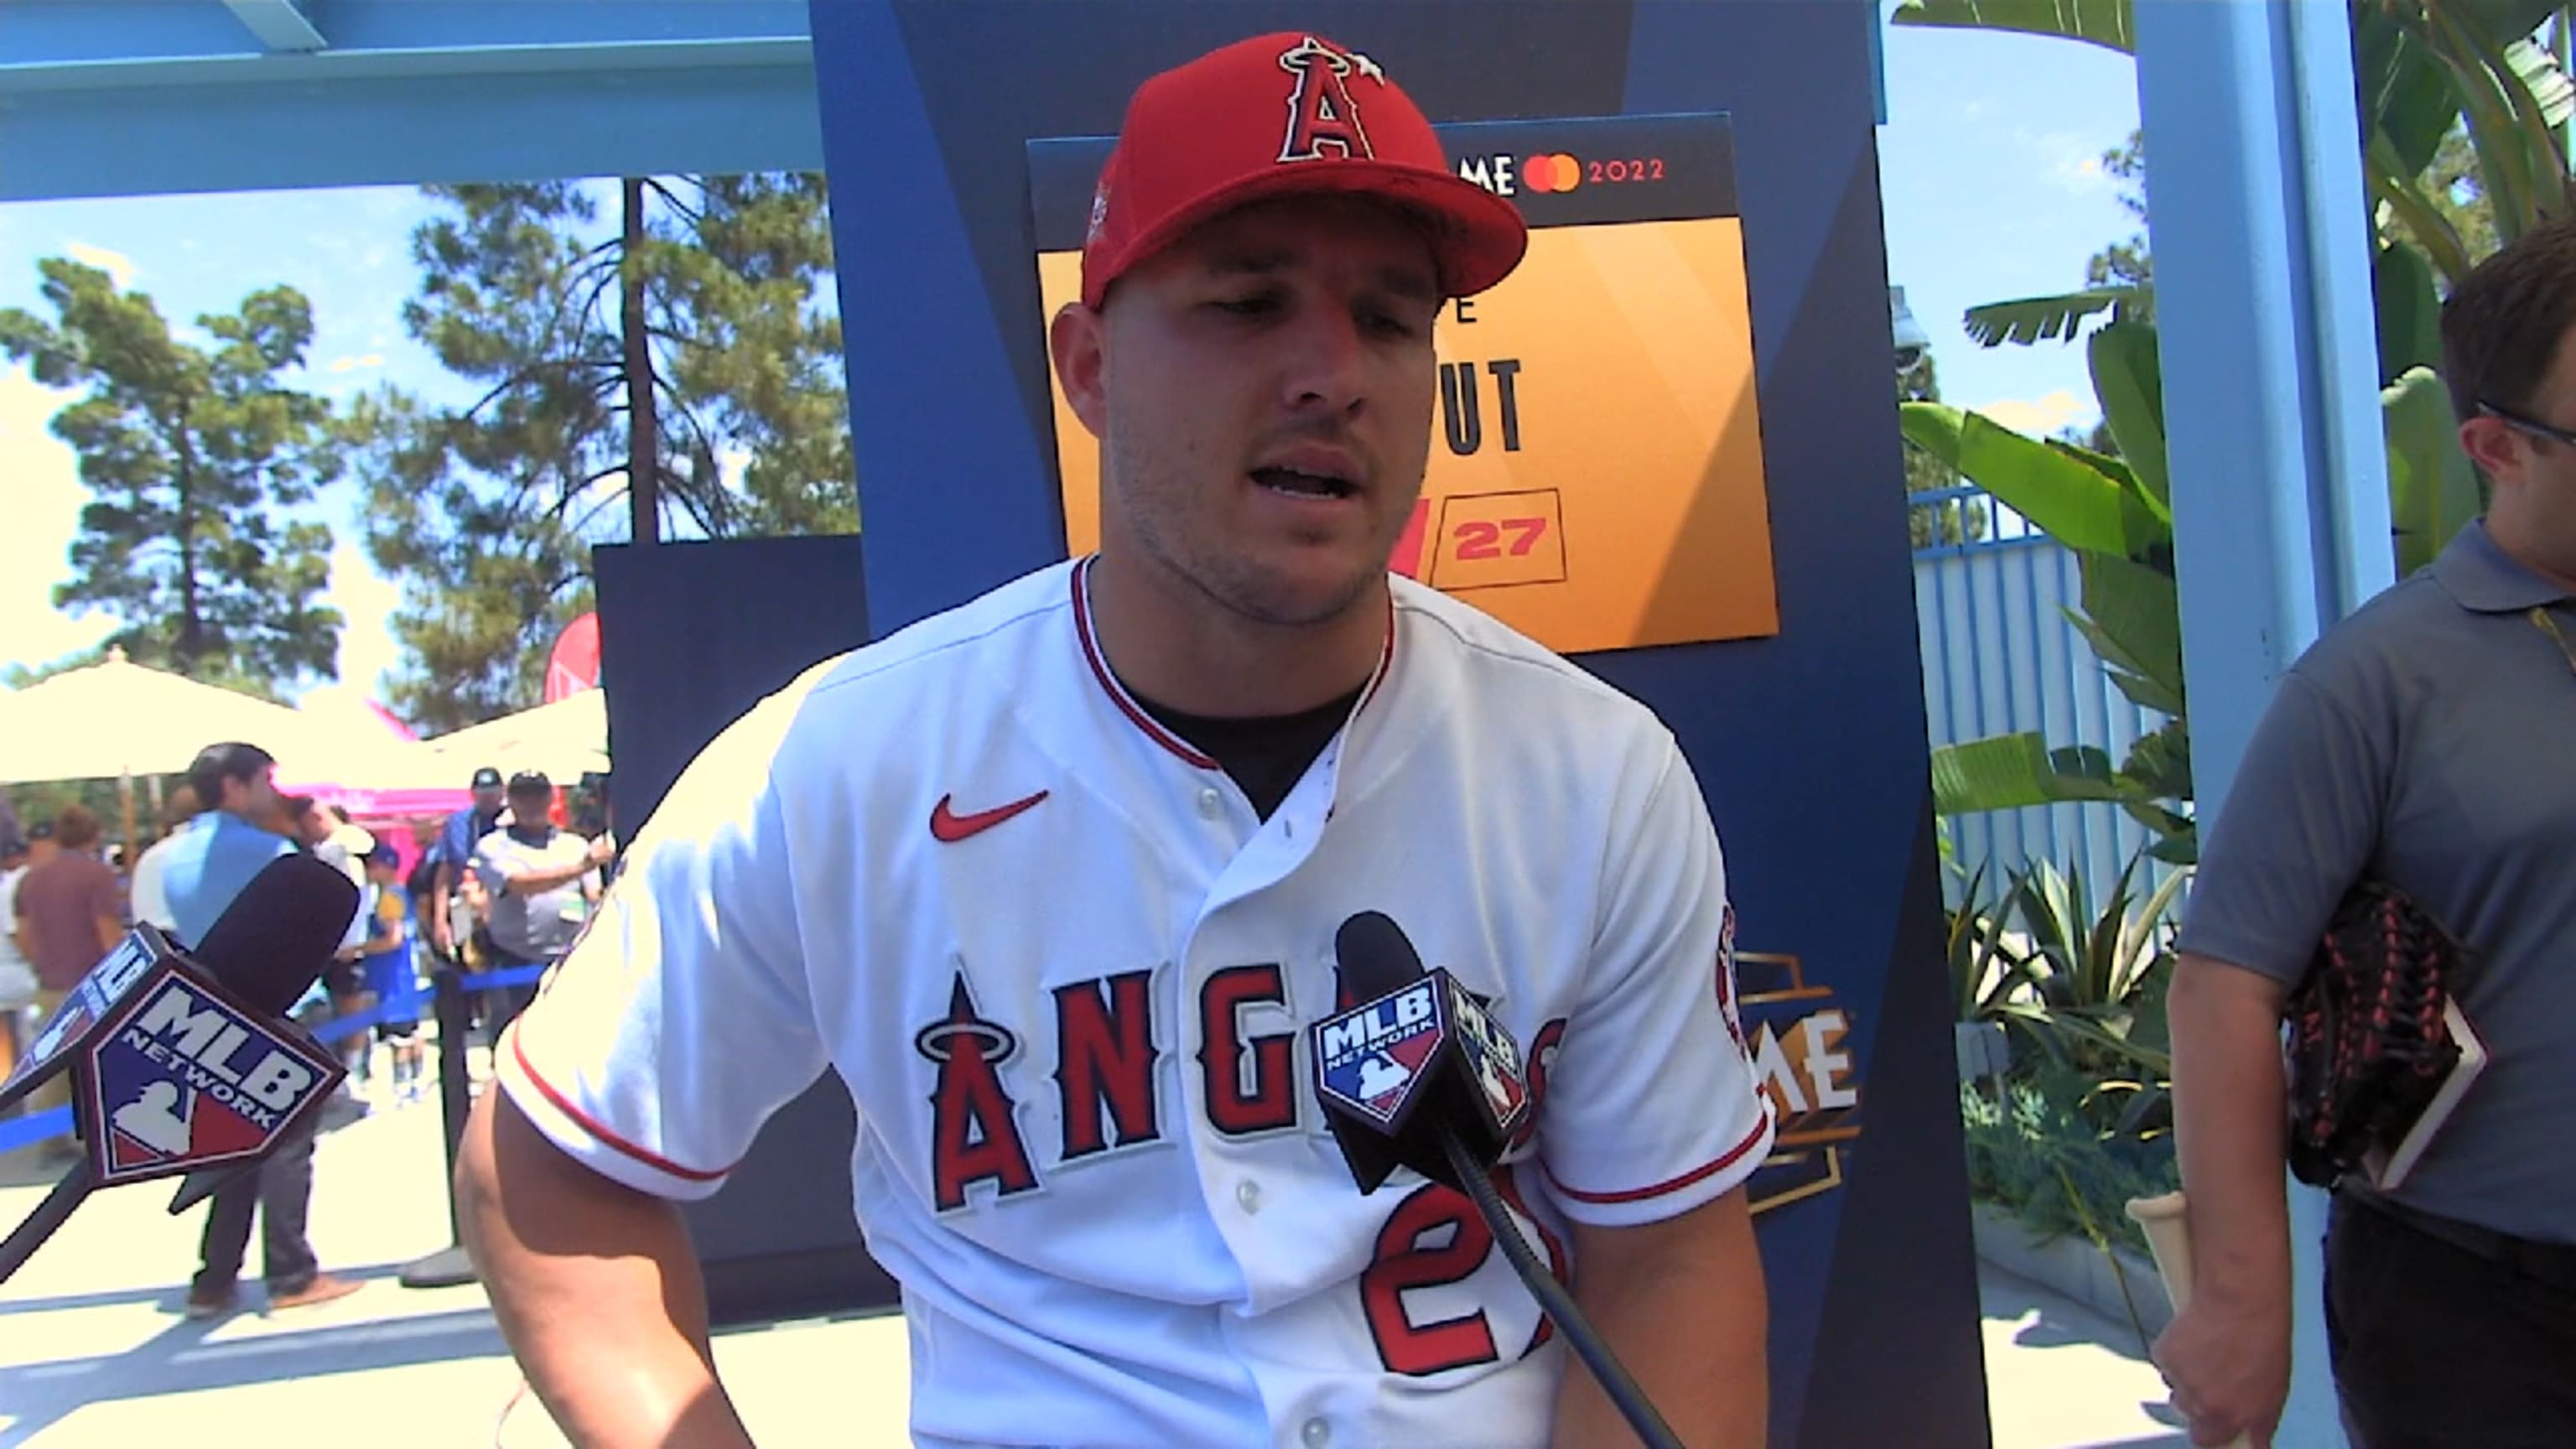 Mike Trout diagnosed with 'pretty rare condition' in back